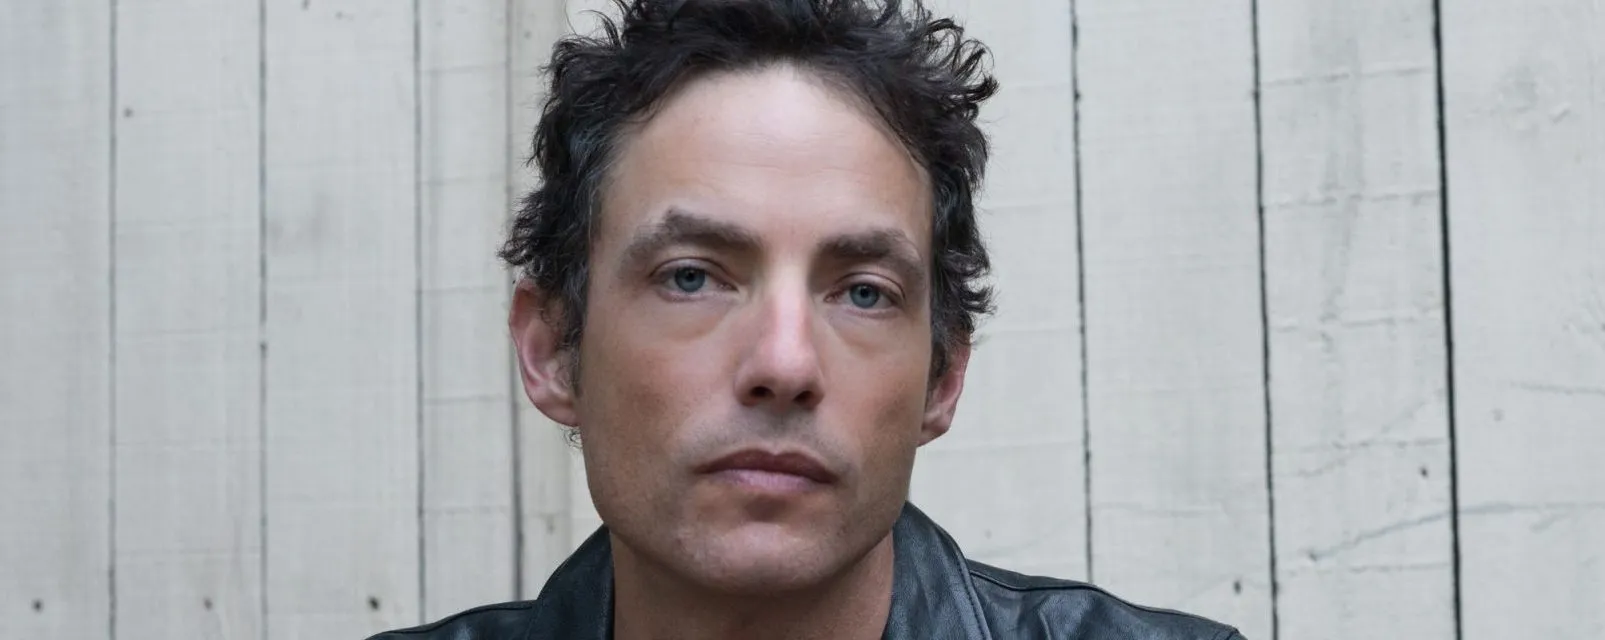 The Wallflowers to Release ‘Exit Wounds,’ the Band’s First New Album in Nearly 10 Years